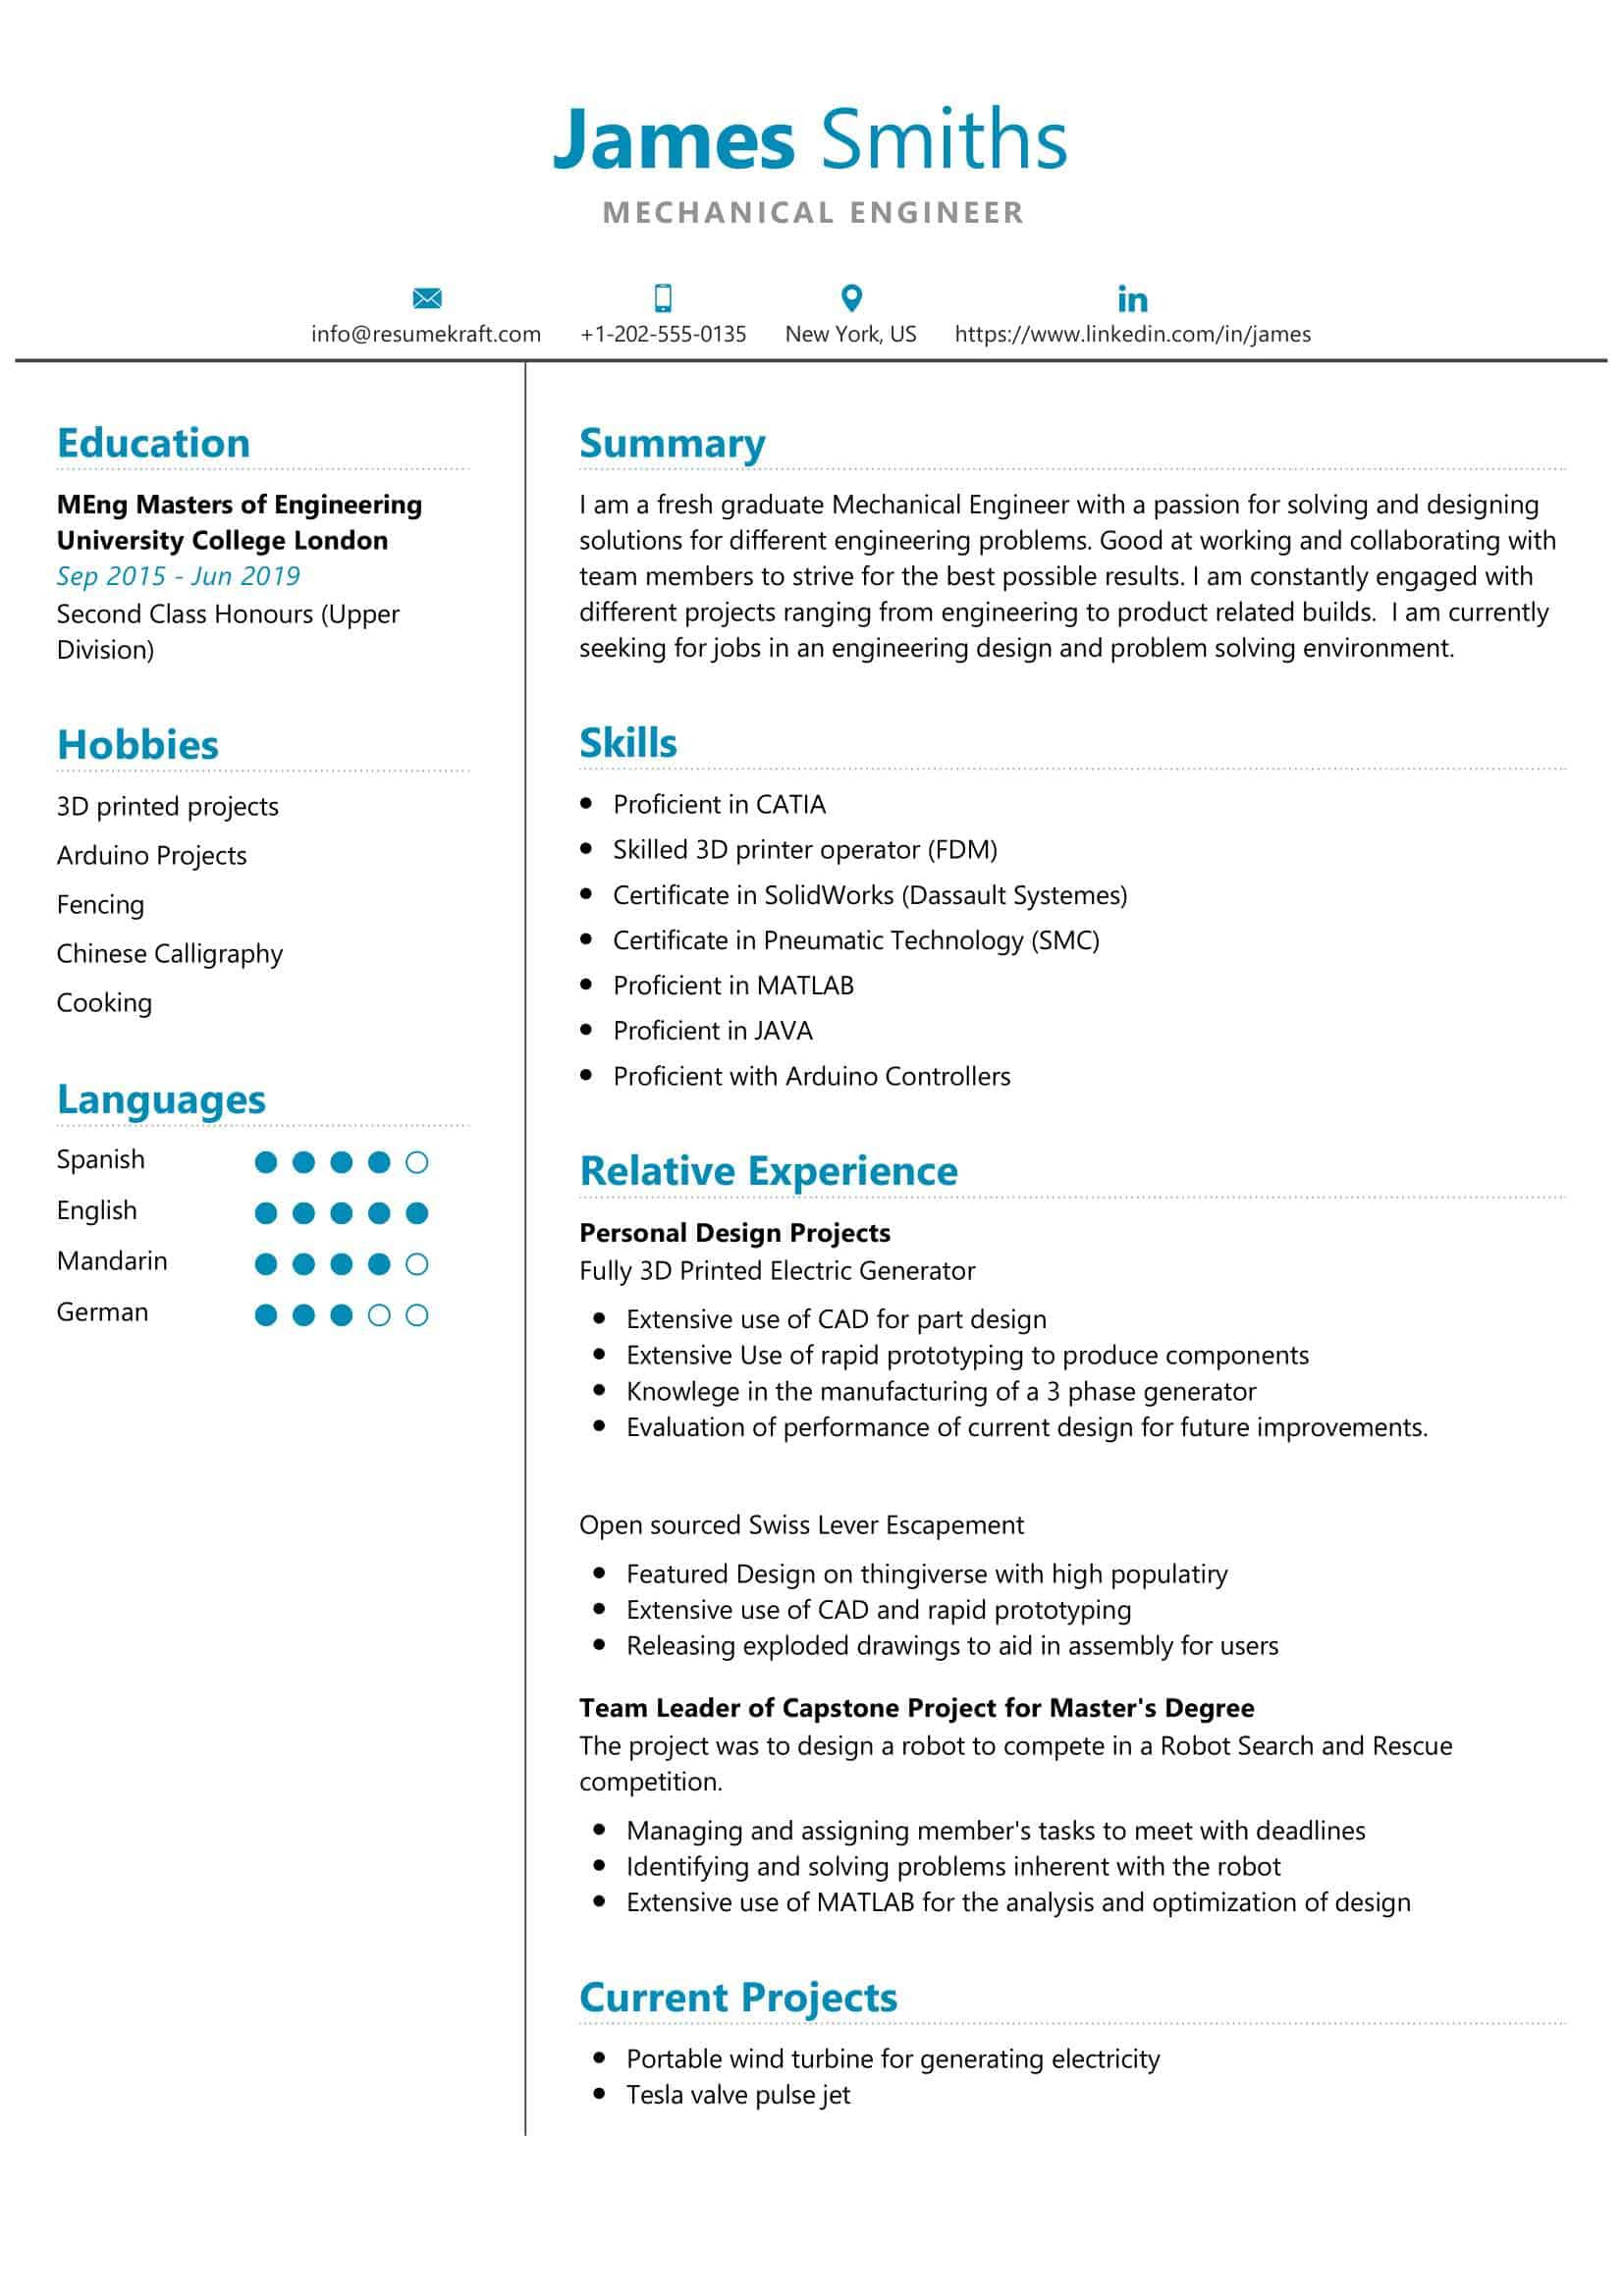 Mechanical Engineer Oil and Gas Resume Samples Mechanical Engineer Student Resume 2022 Writing Tips – Resumekraft